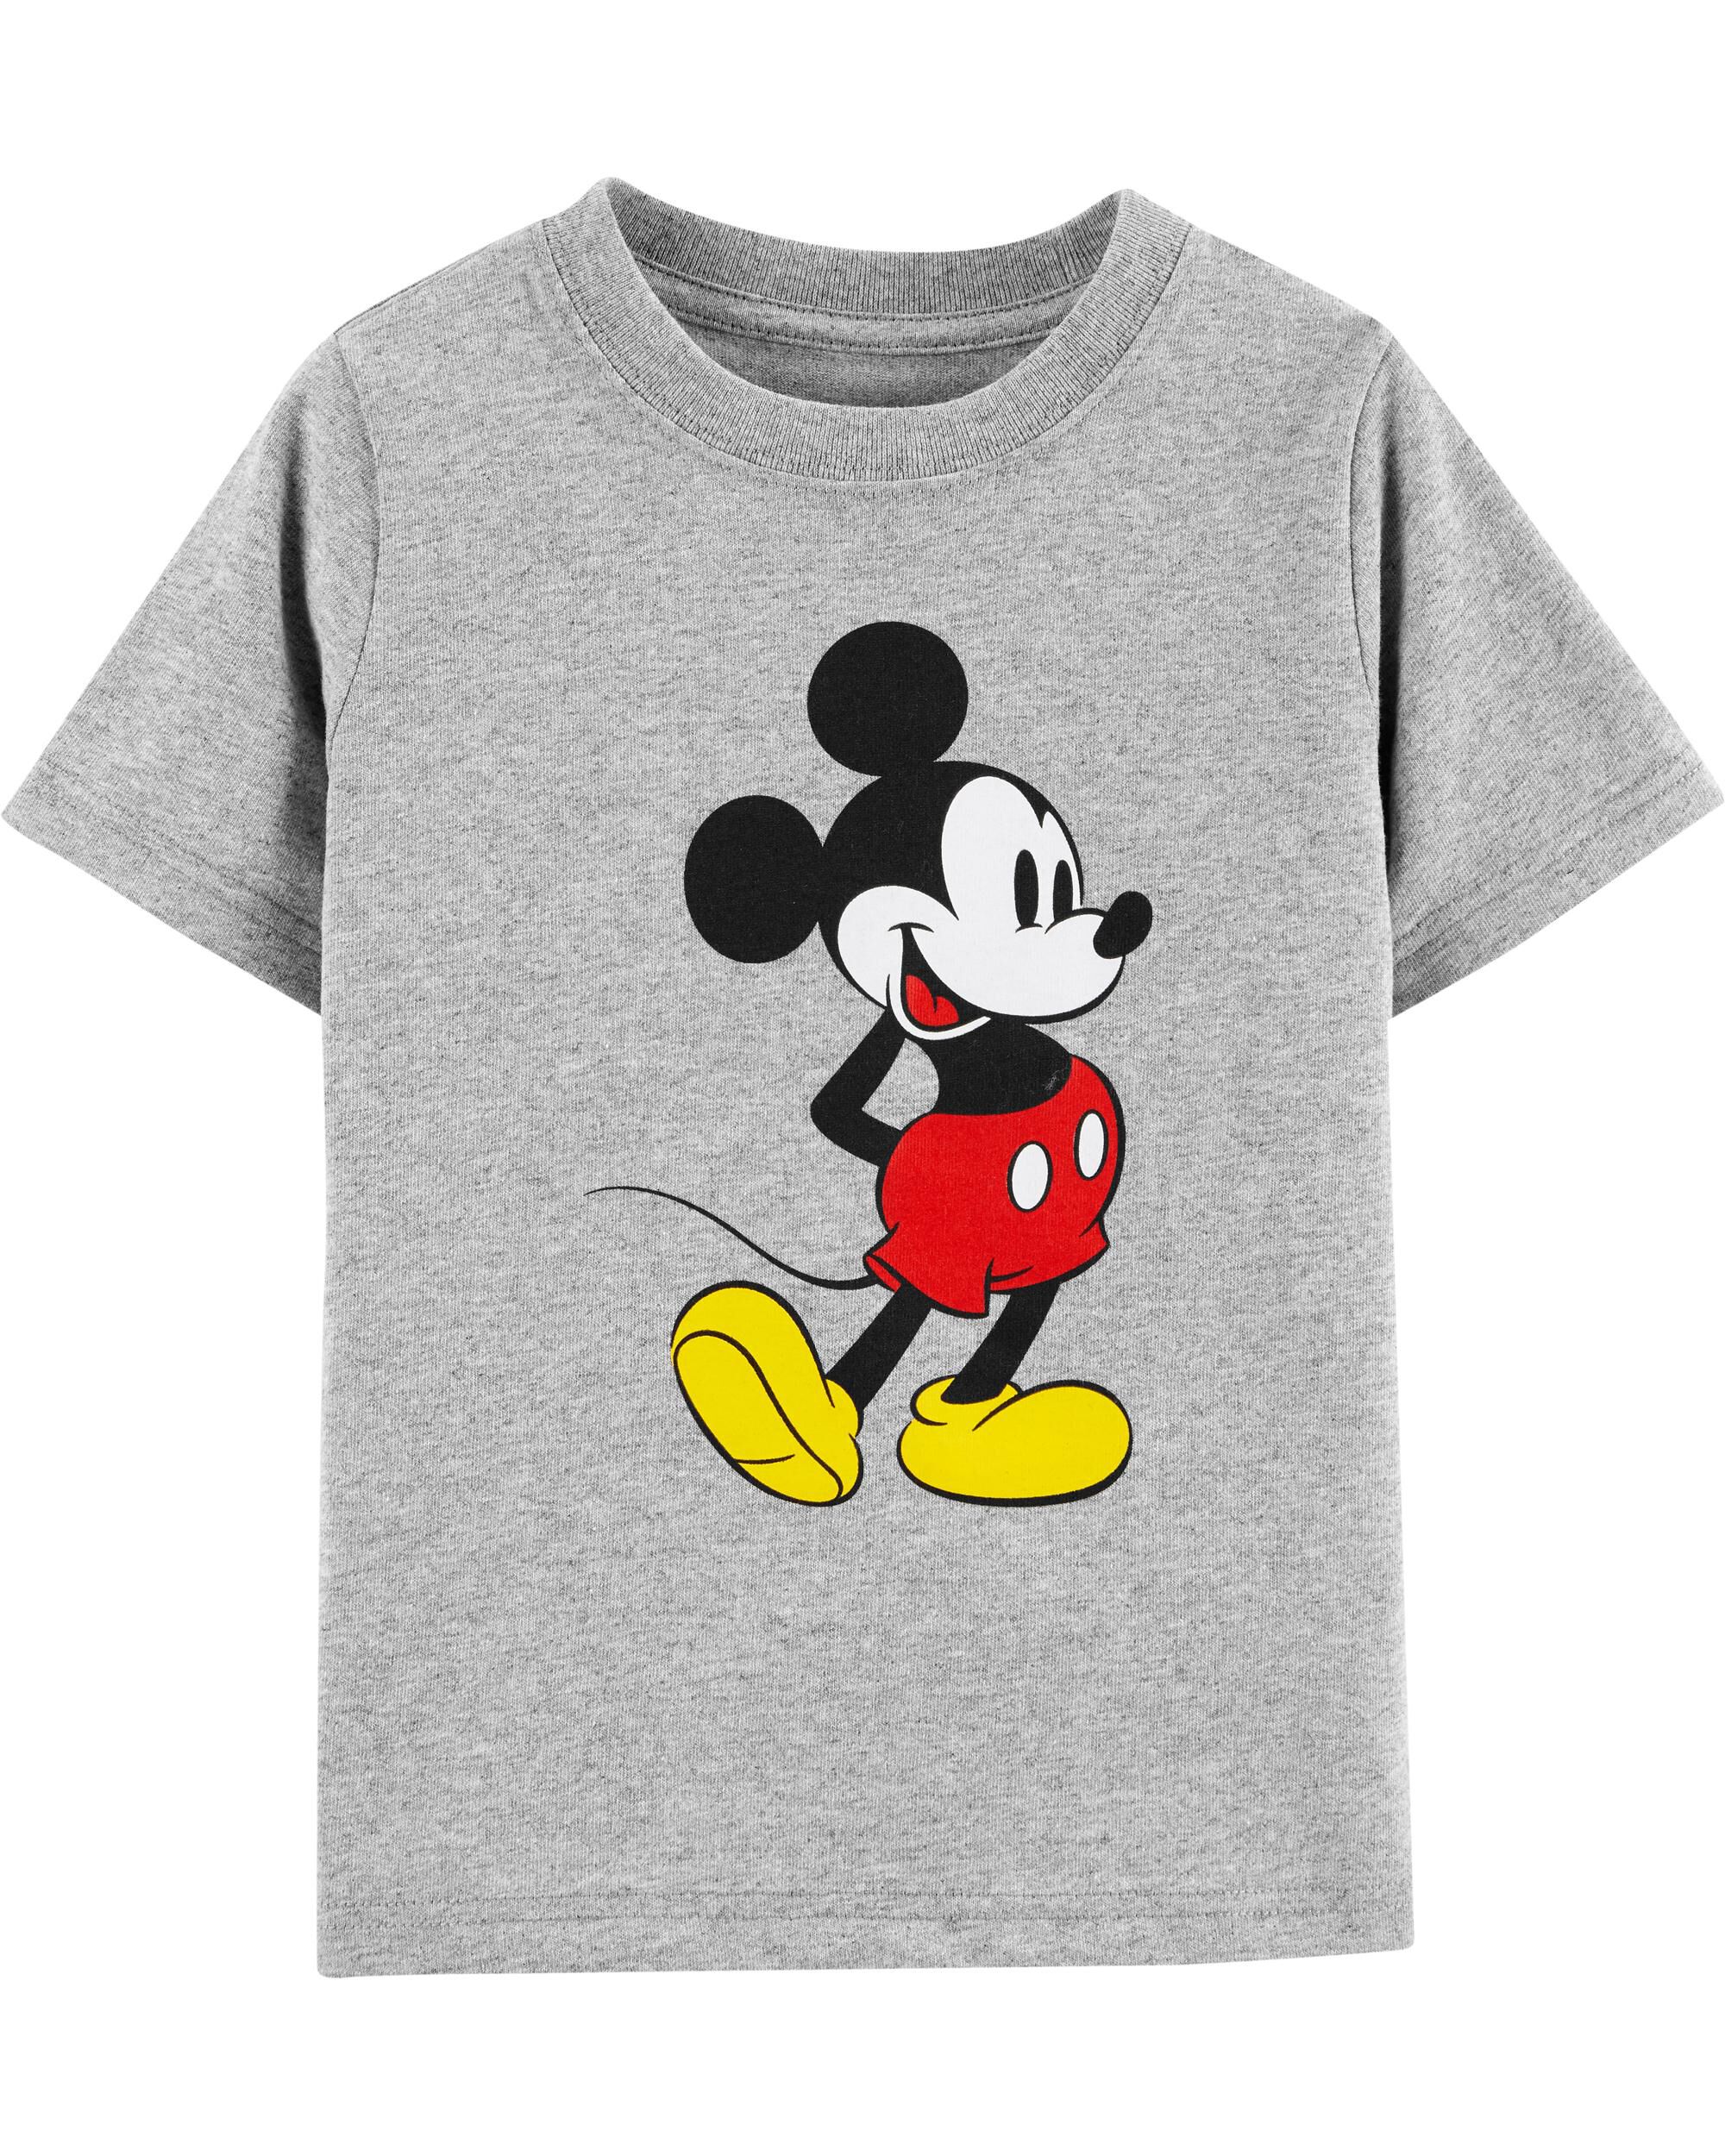 Mickey Minnie Mouse Couple Love Kids Boys Youth Tee T-Shirt Tops Children Blouse